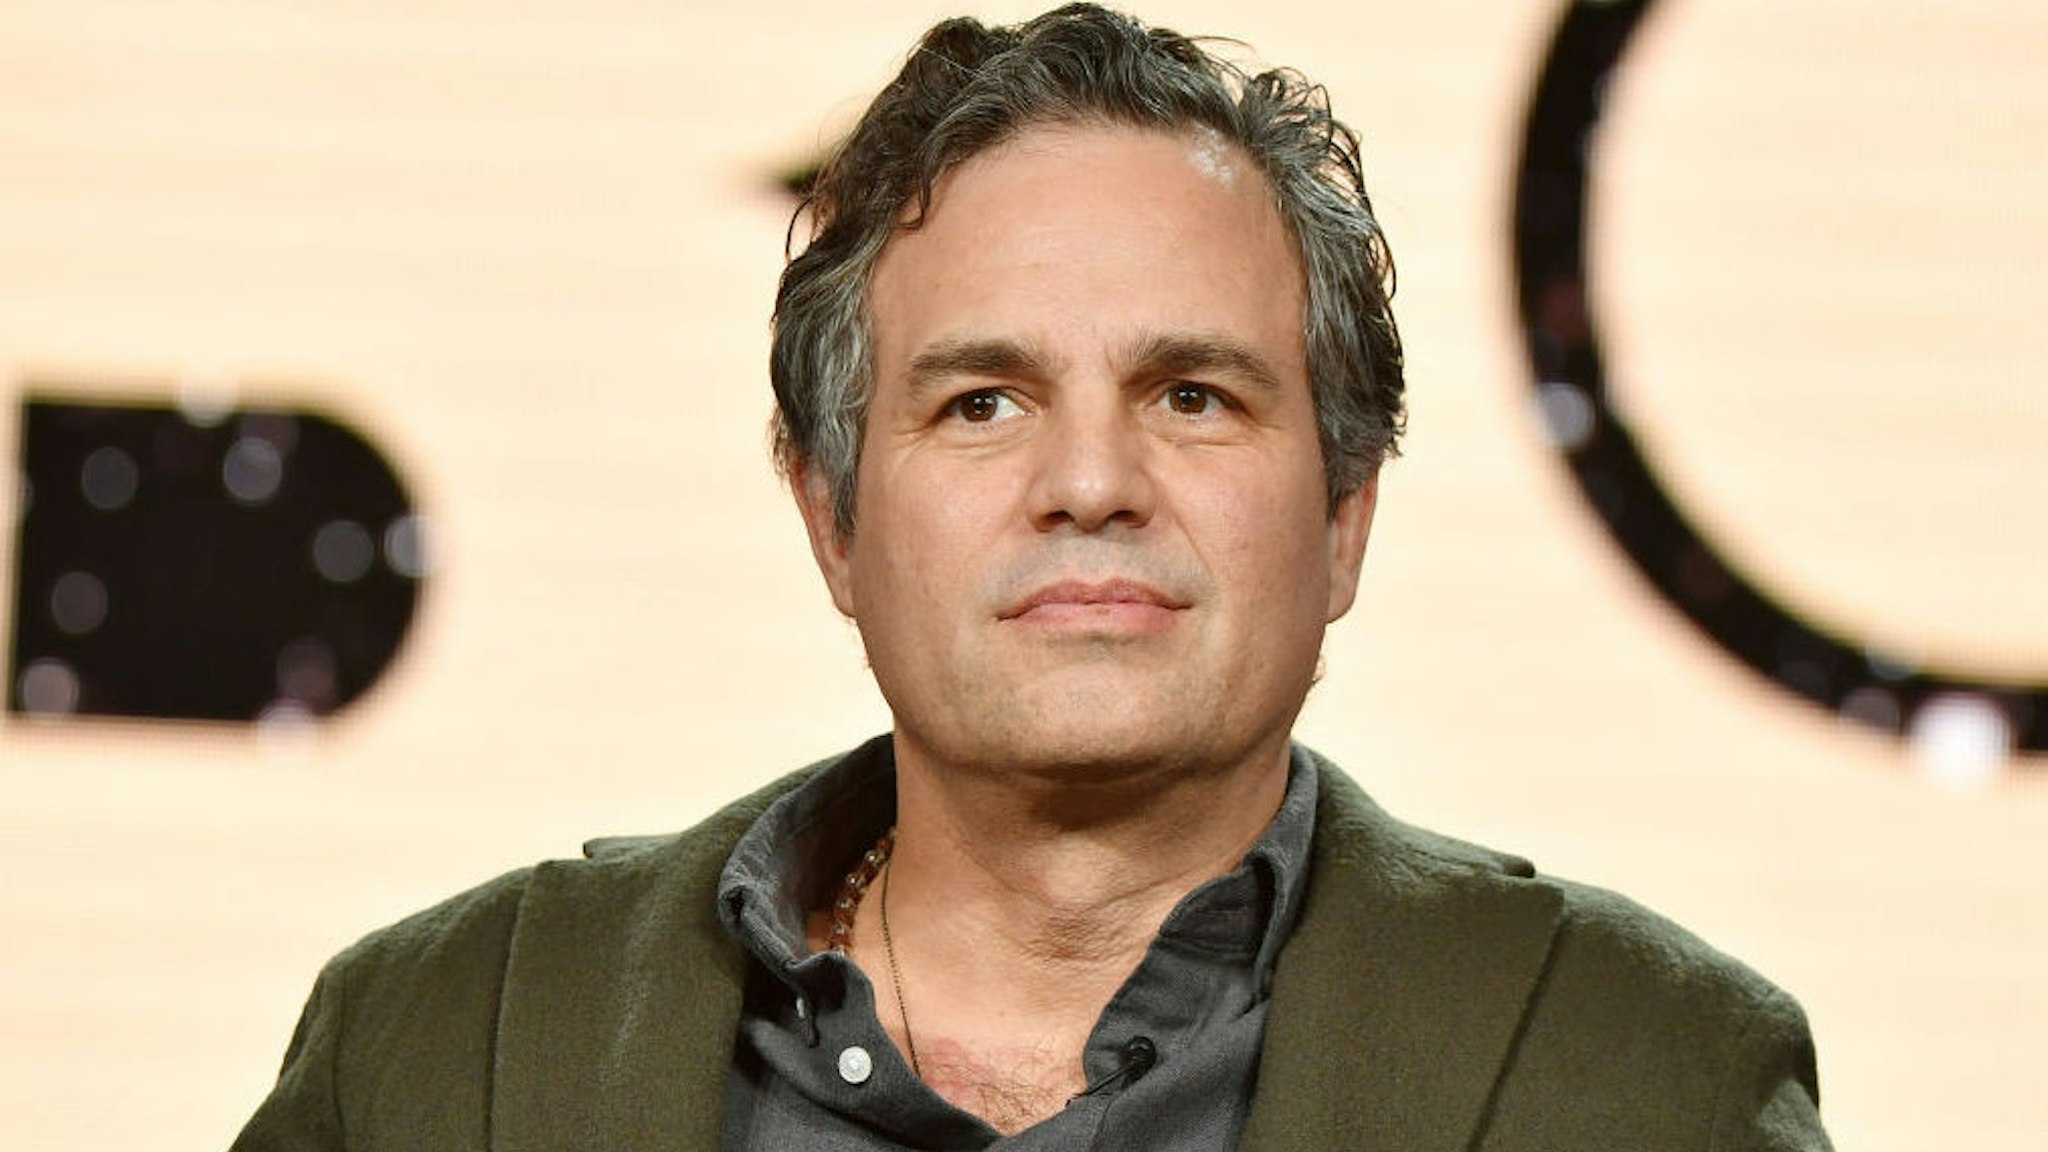 Mark Ruffalo of "I Know This Much Is True" speaks during the HBO segment of the 2020 Winter TCA Press Tour at The Langham Huntington, Pasadena on January 15, 2020 in Pasadena, California.